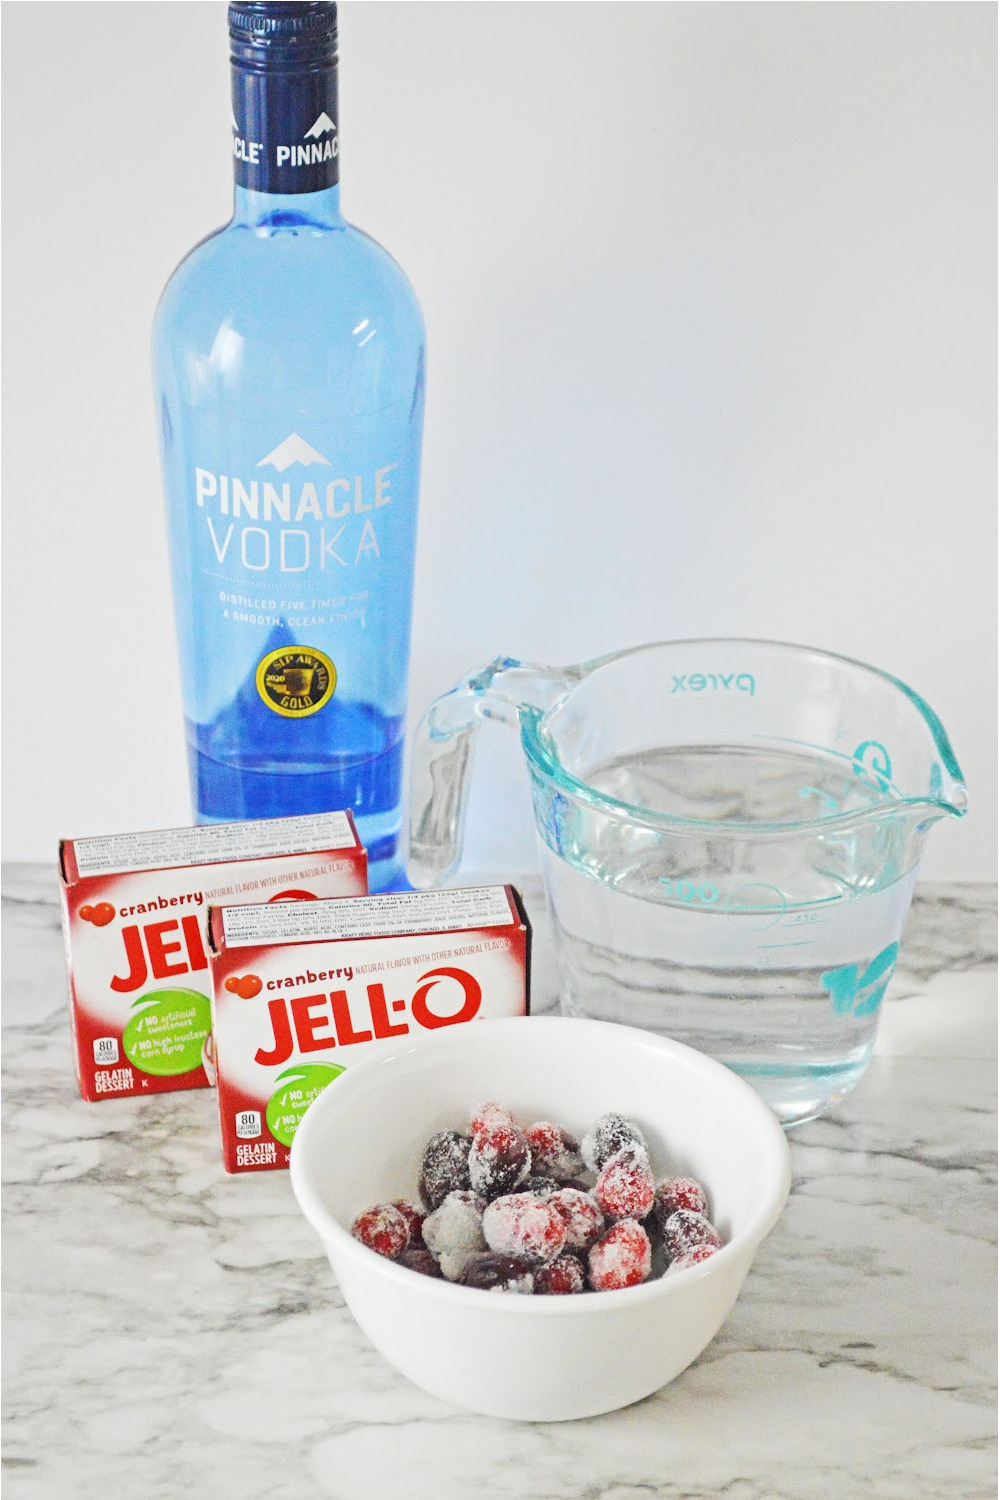 Ingredients for Cranberry jello Shot recipe including cranberry jell-o, vodka and sugar coated cranberry garnish.